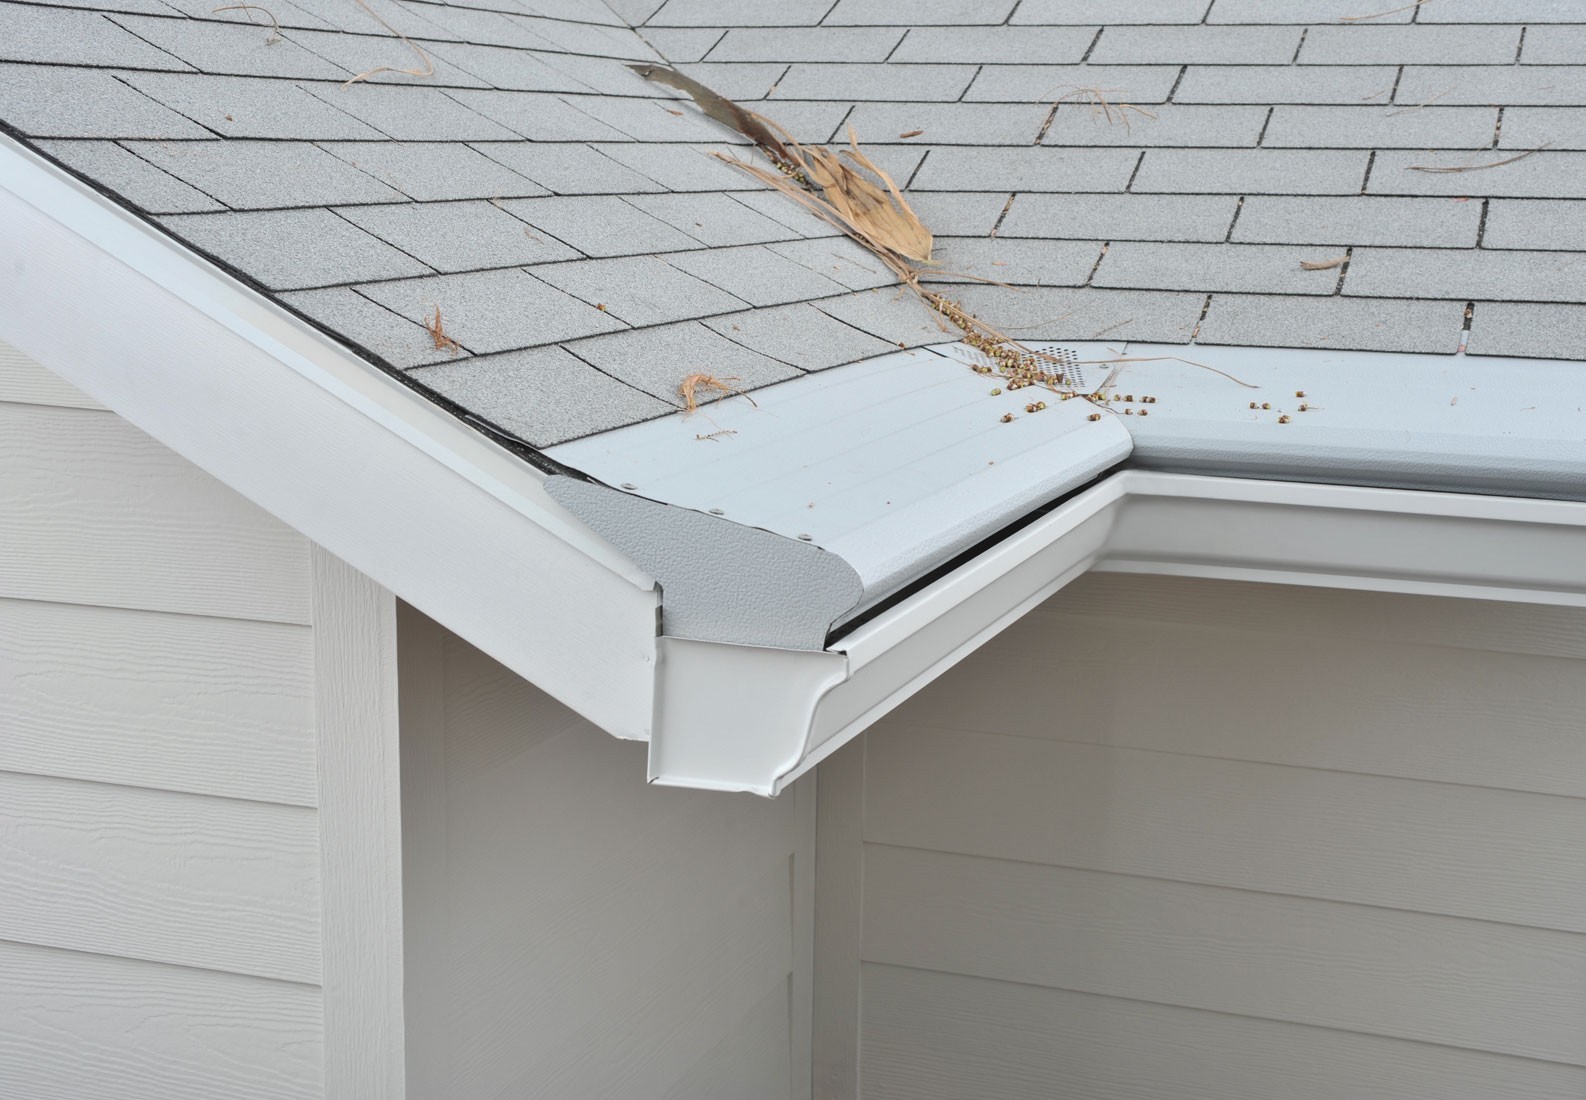 Gutter Protection Systems Price Hill Oh